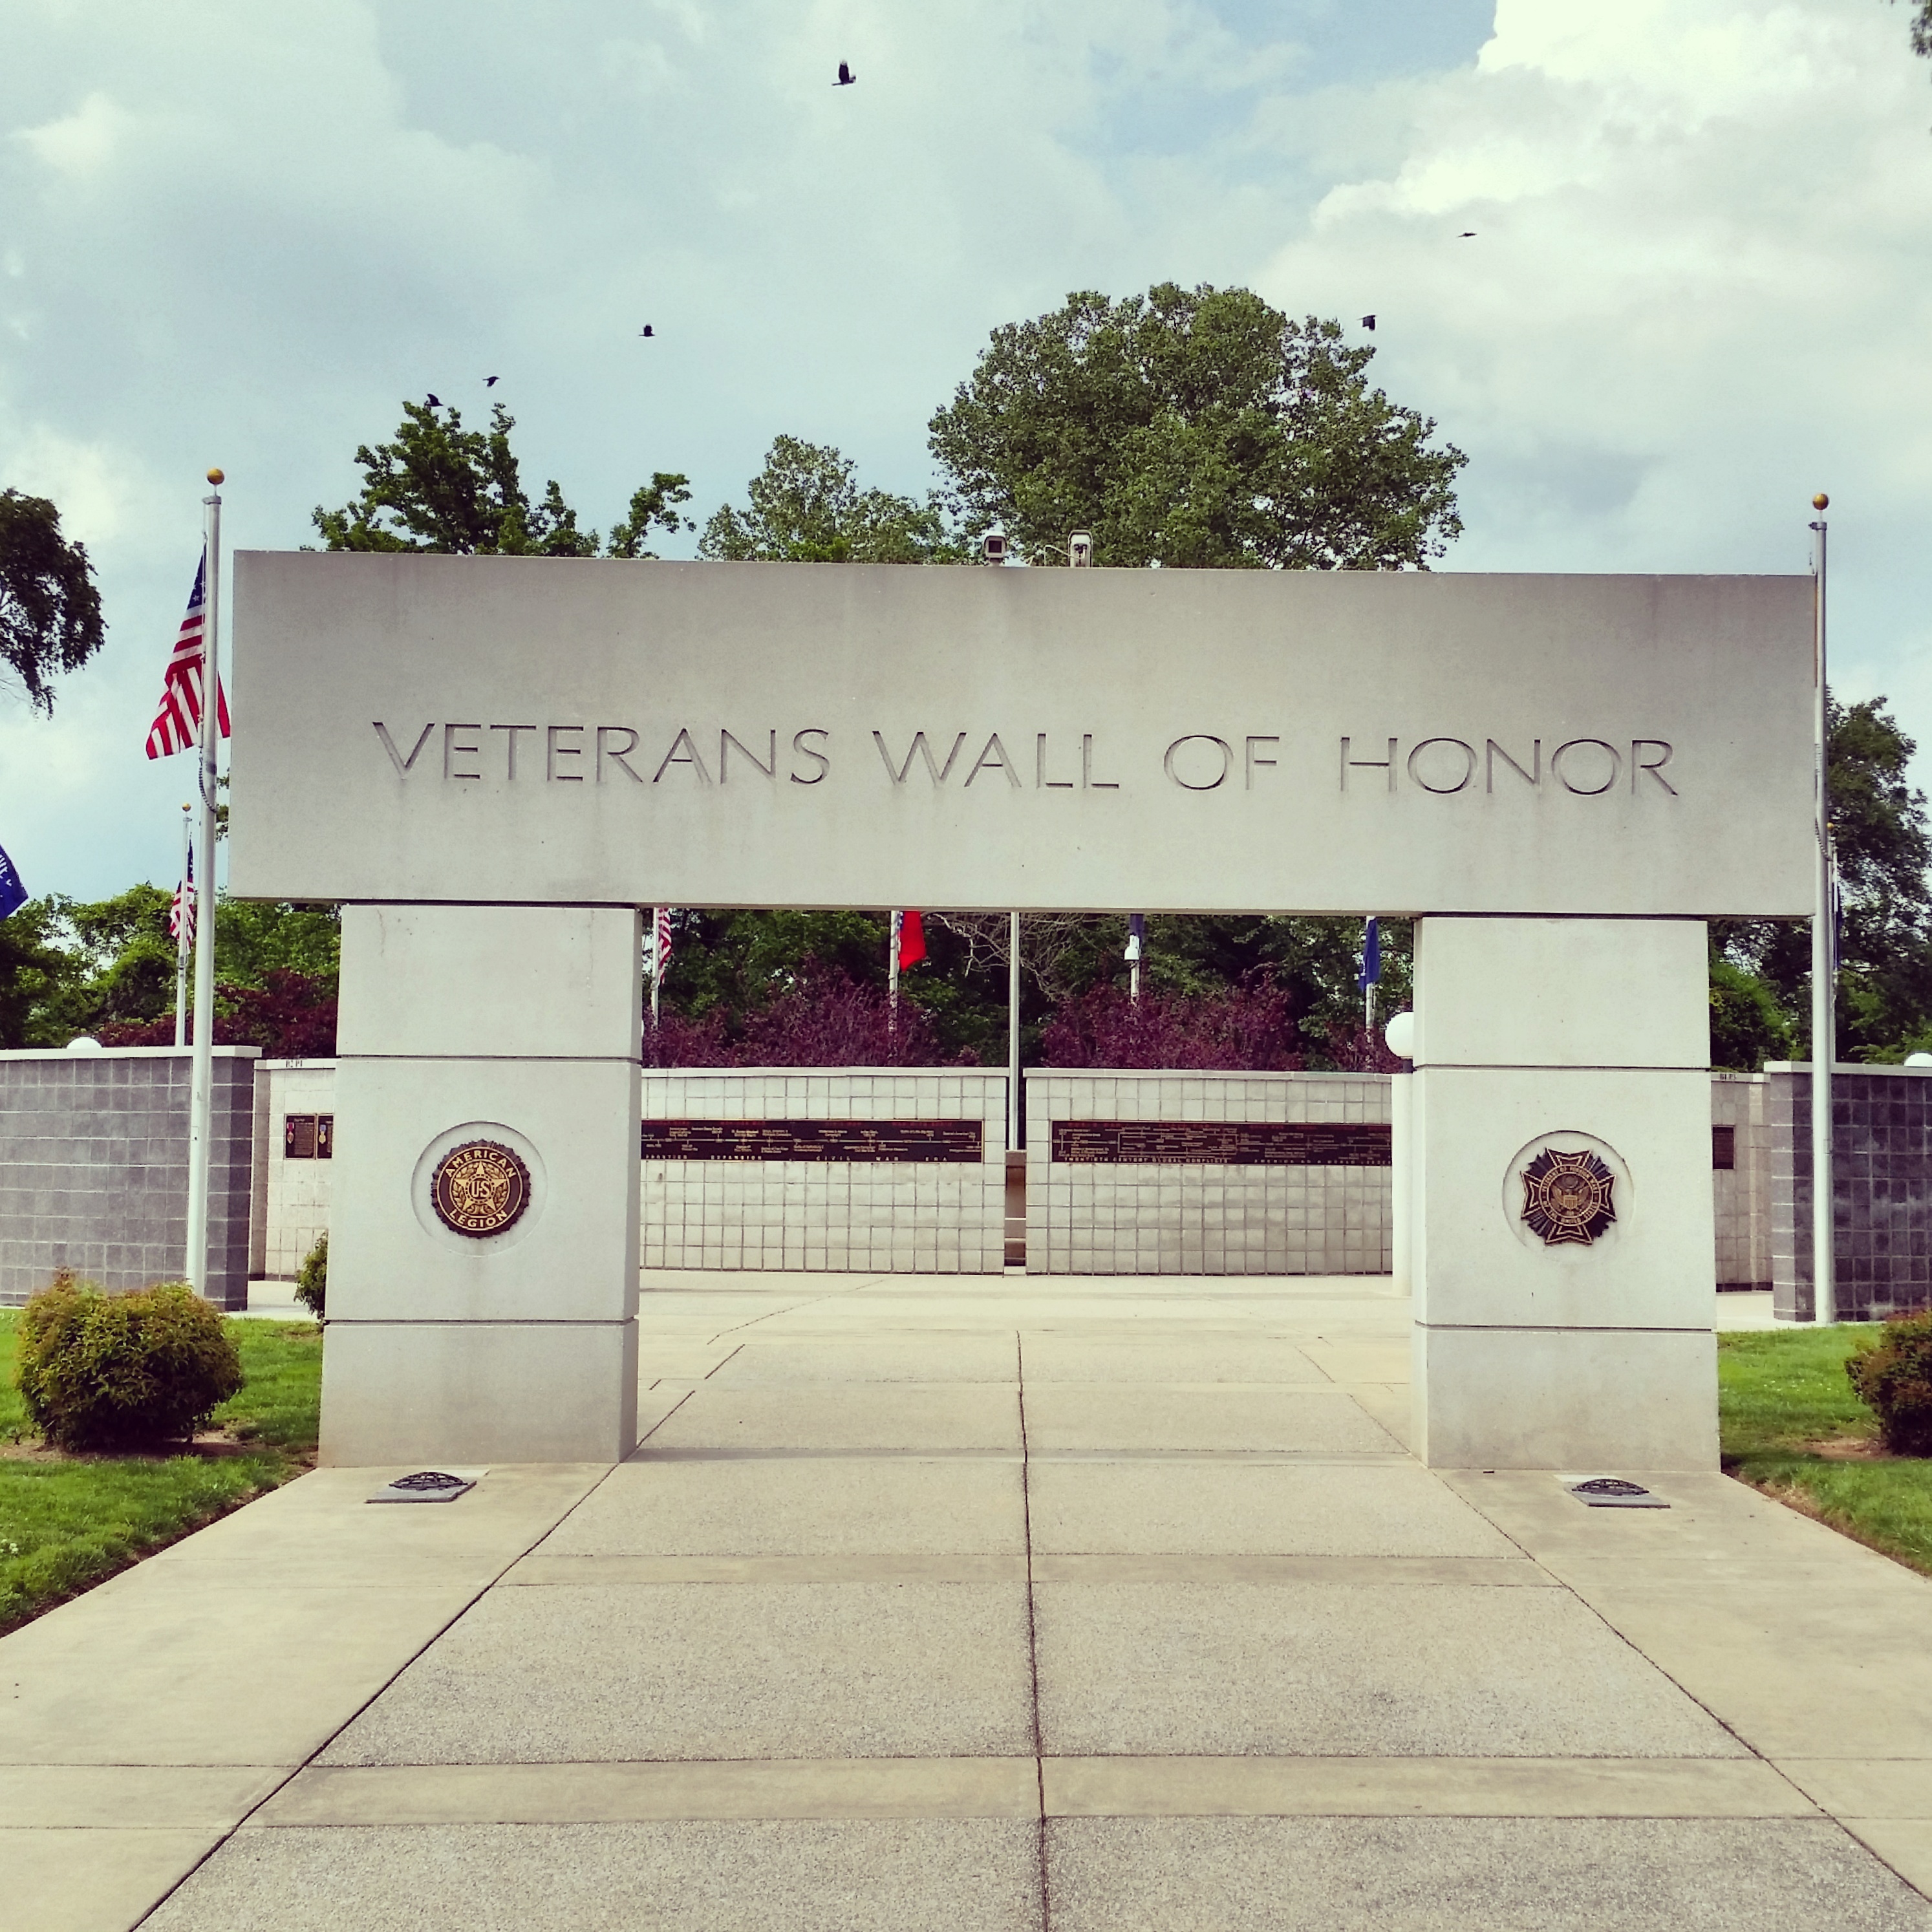 Read more about the article Veterans Wall of Honor in Bella Vista Arkansas